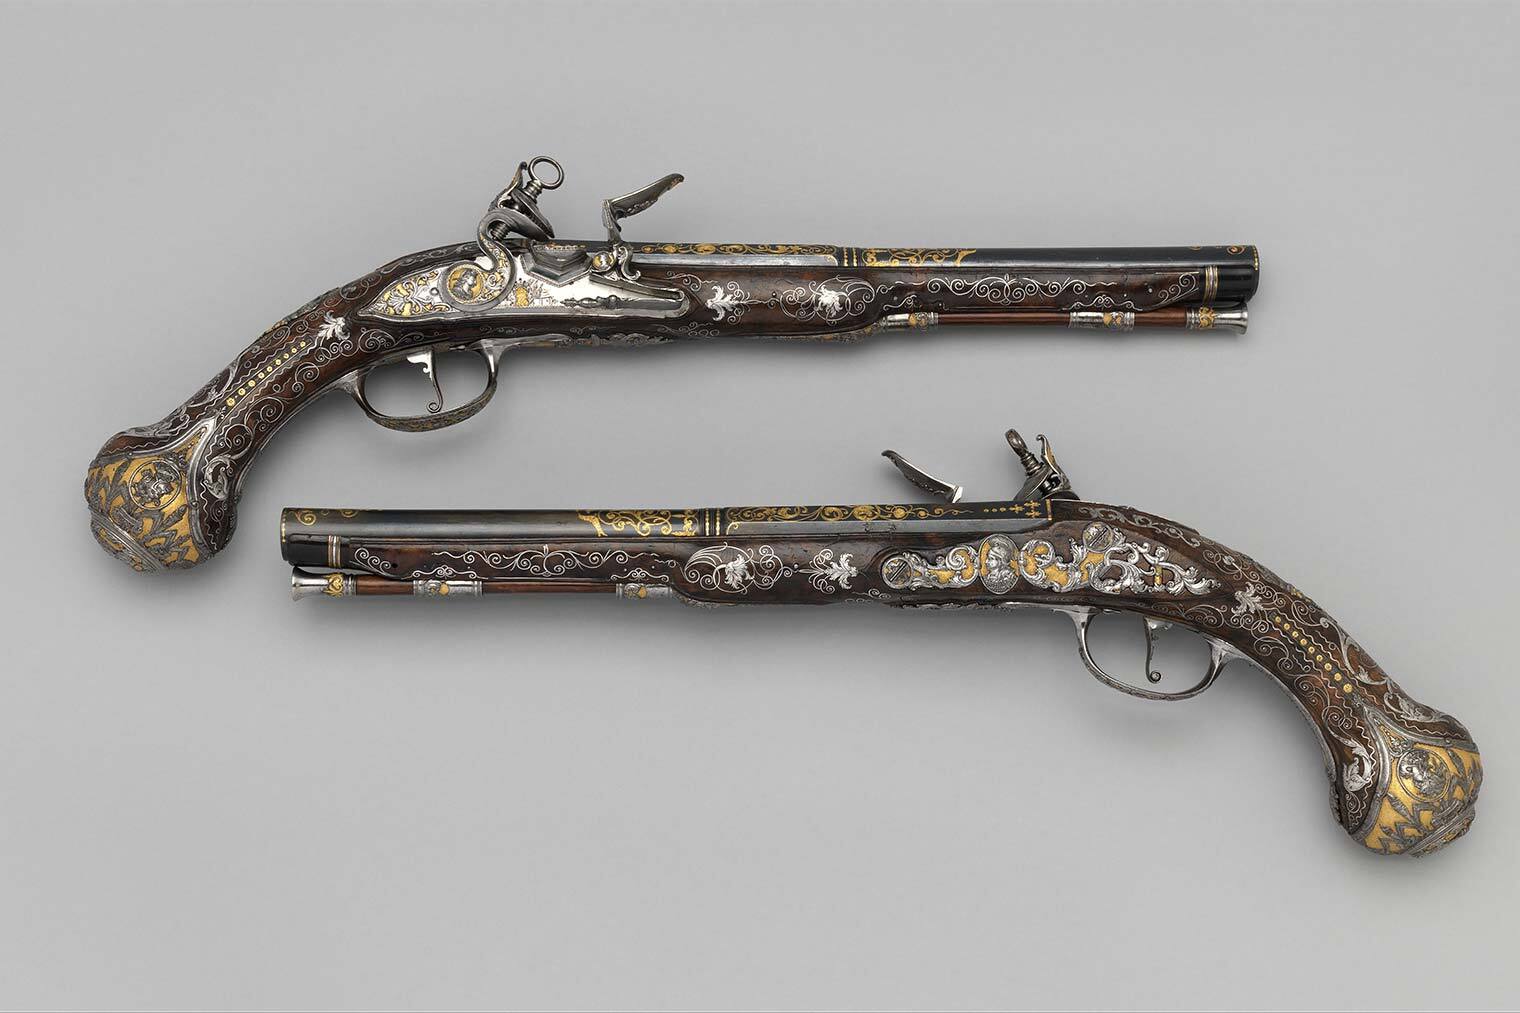 A pair of ornate pistols